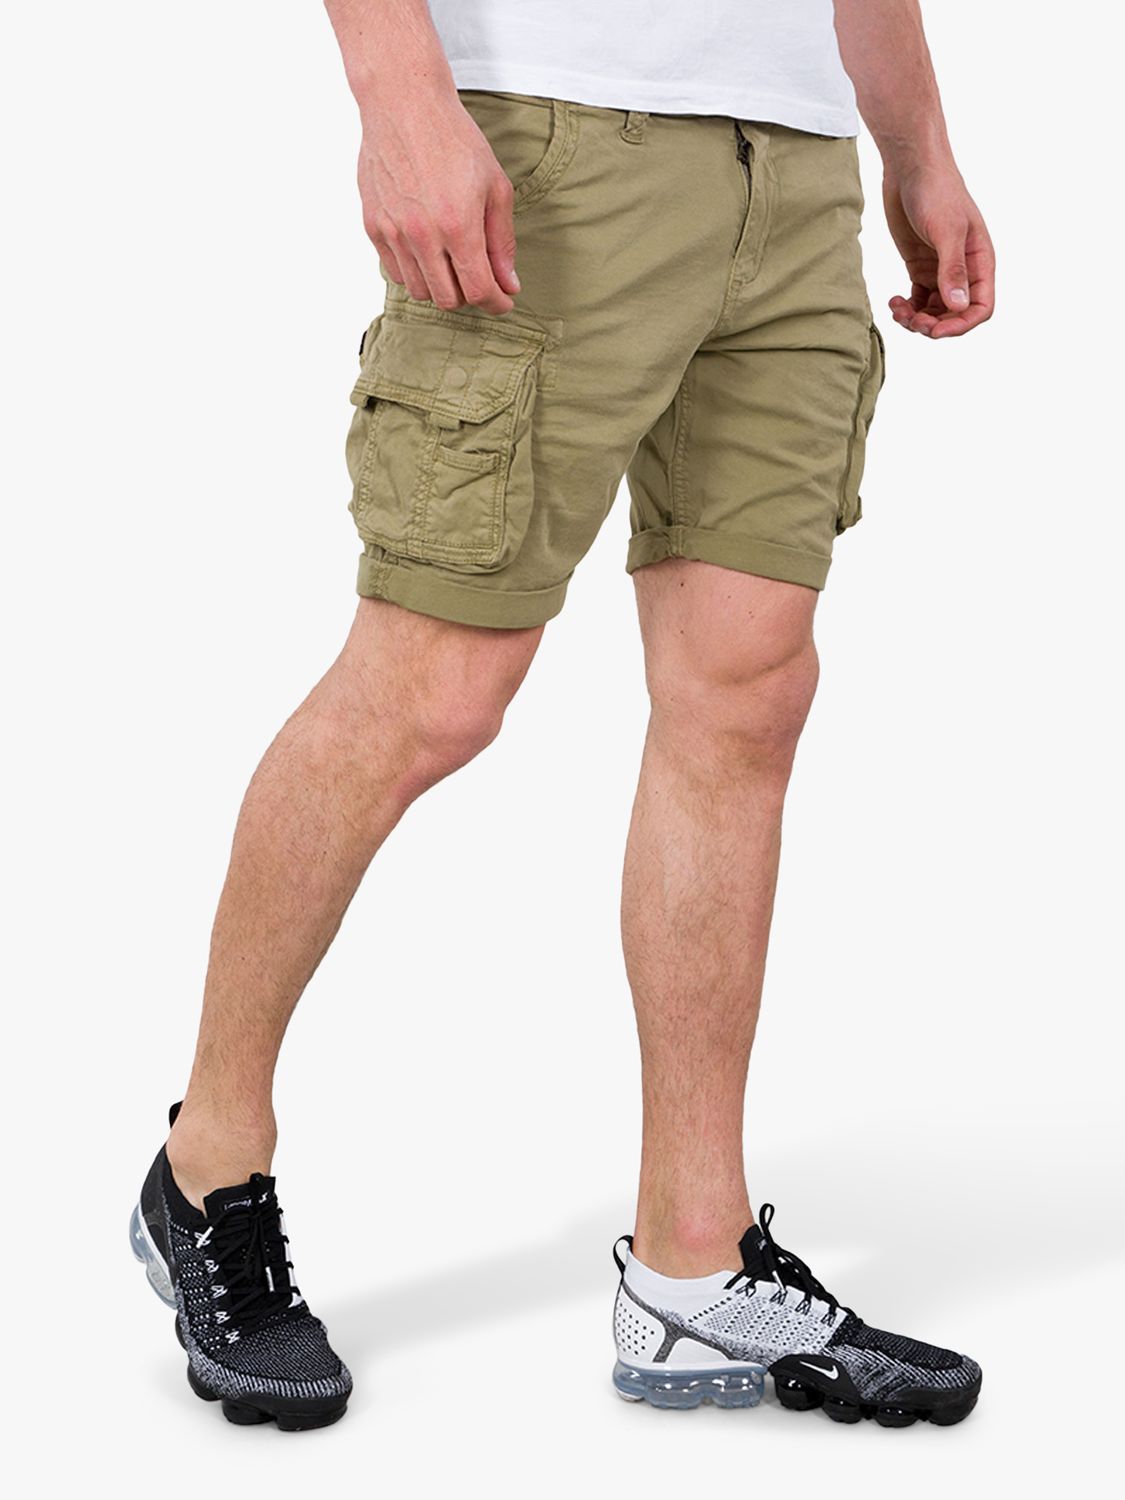 Alpha Industries Shorts, 82 Olive & Light John Crew at Lewis Partners Cargo